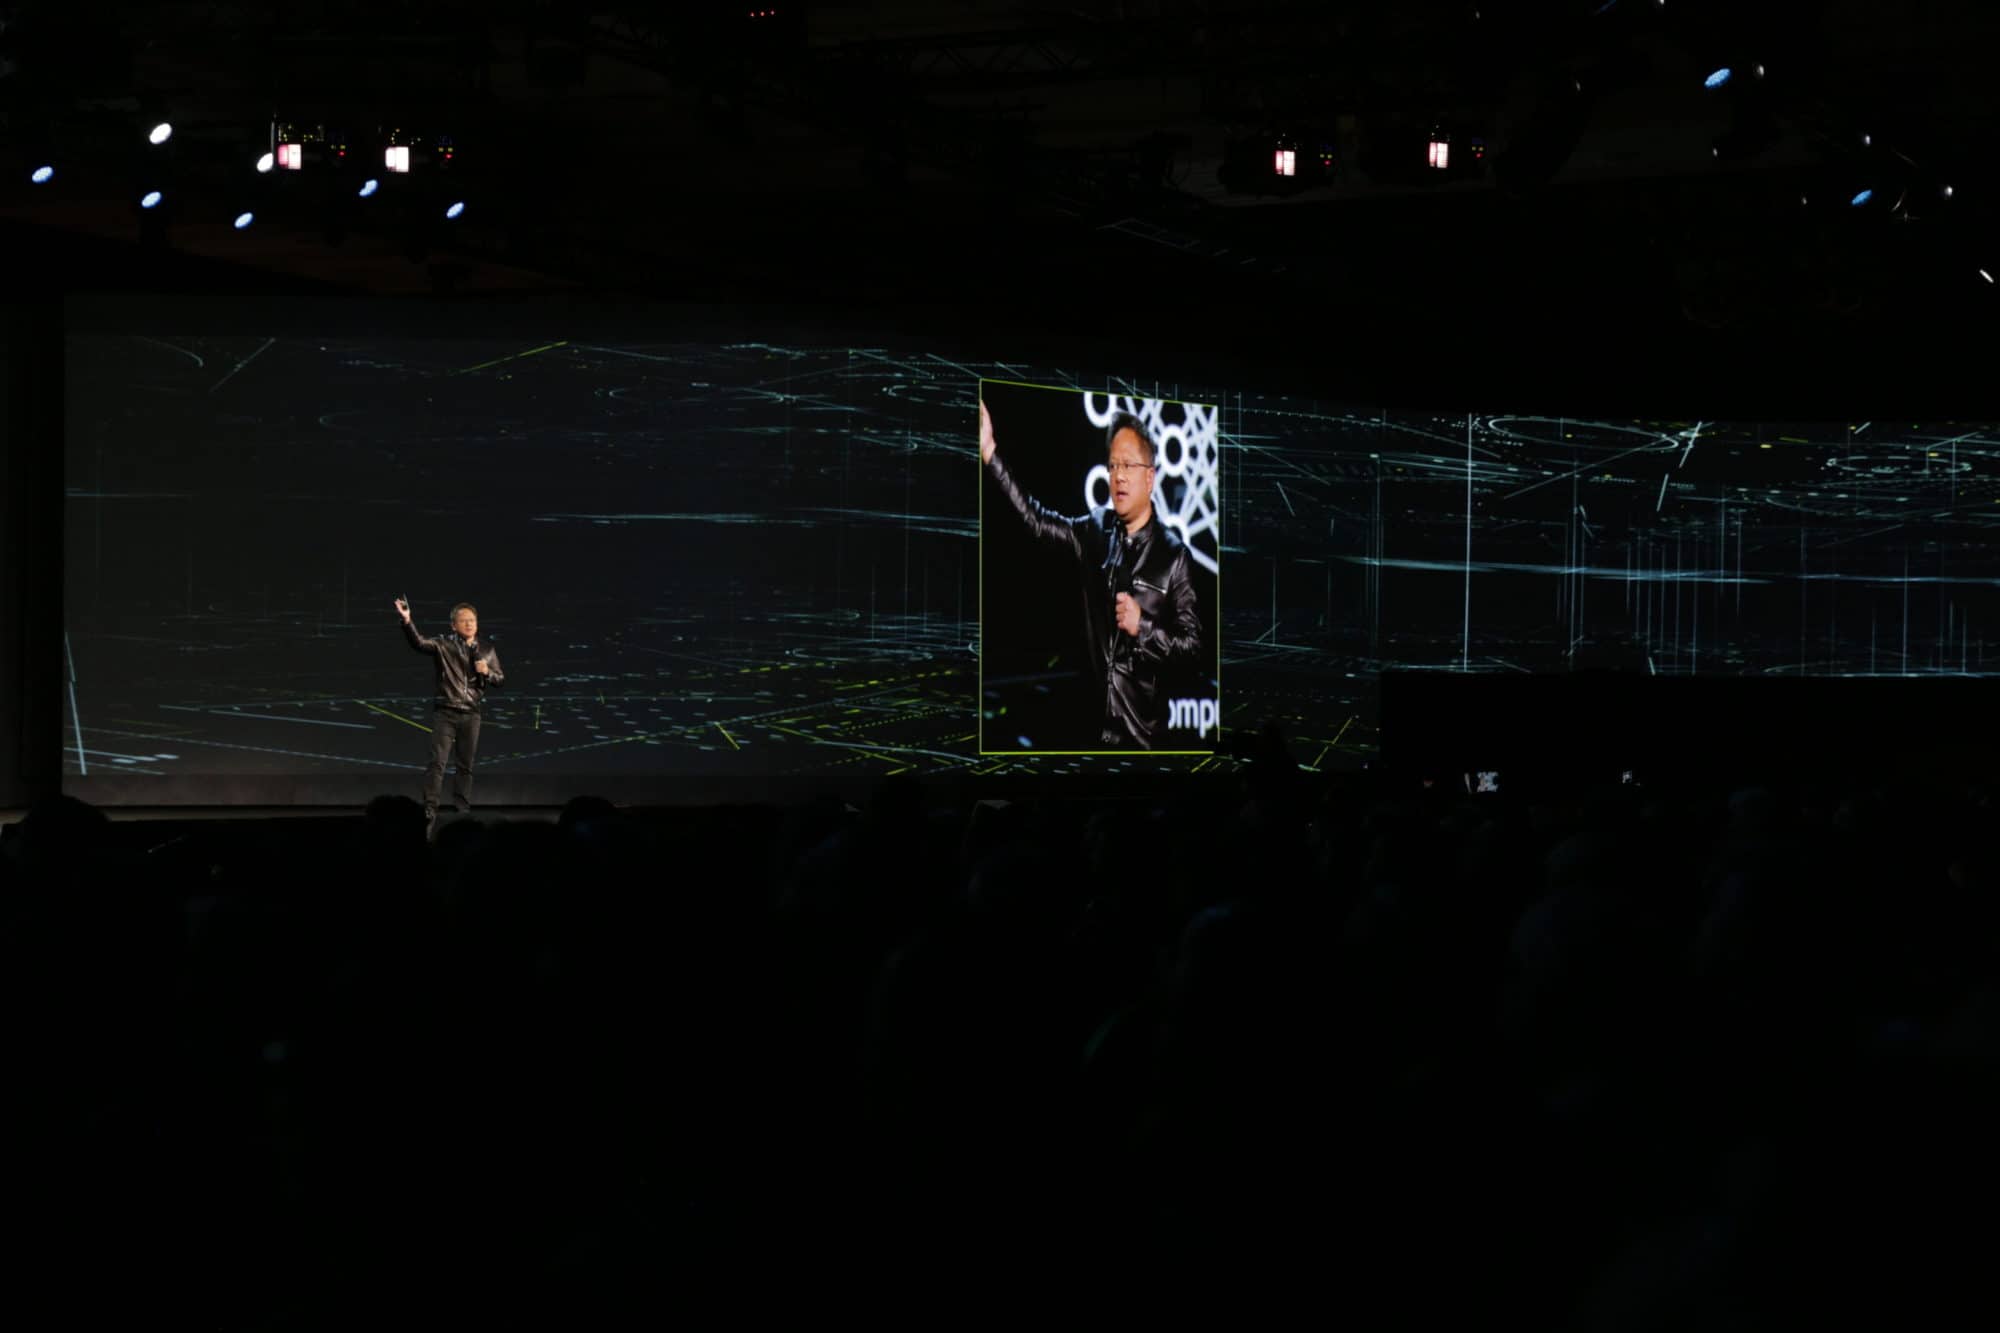 NVIDIA's giant 300-feet long screen at CES 2017